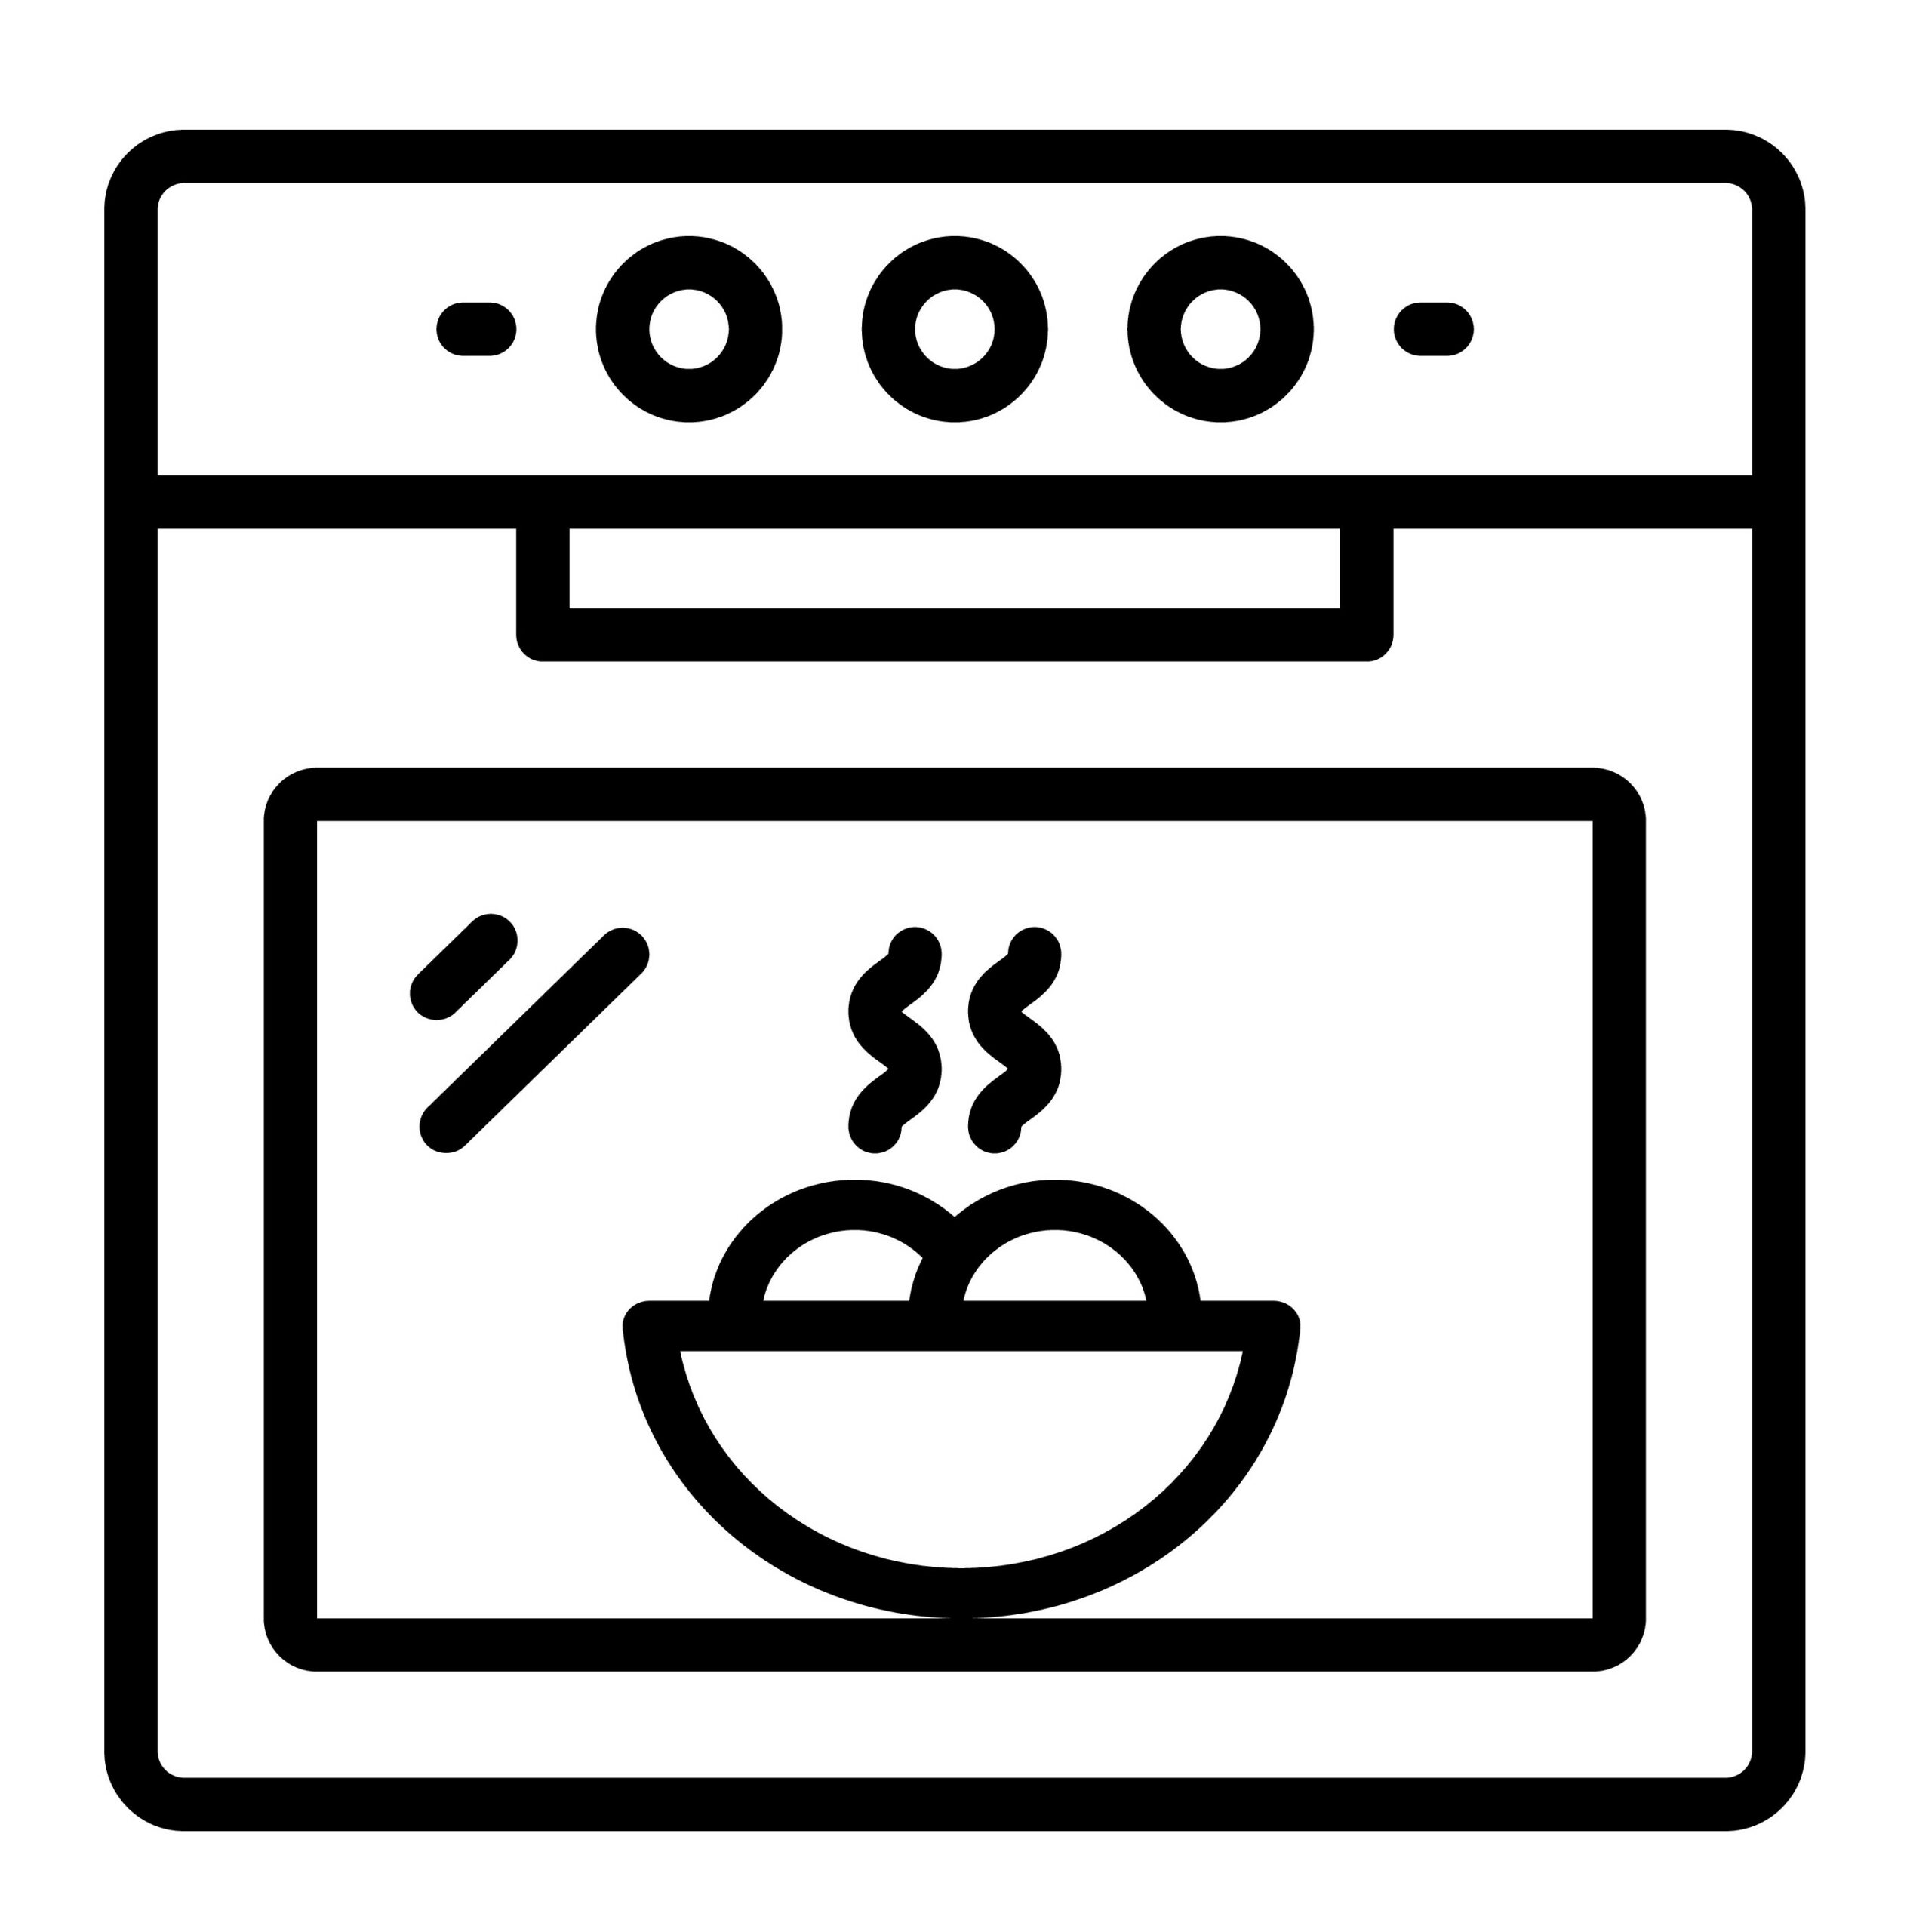 Symbol for oven